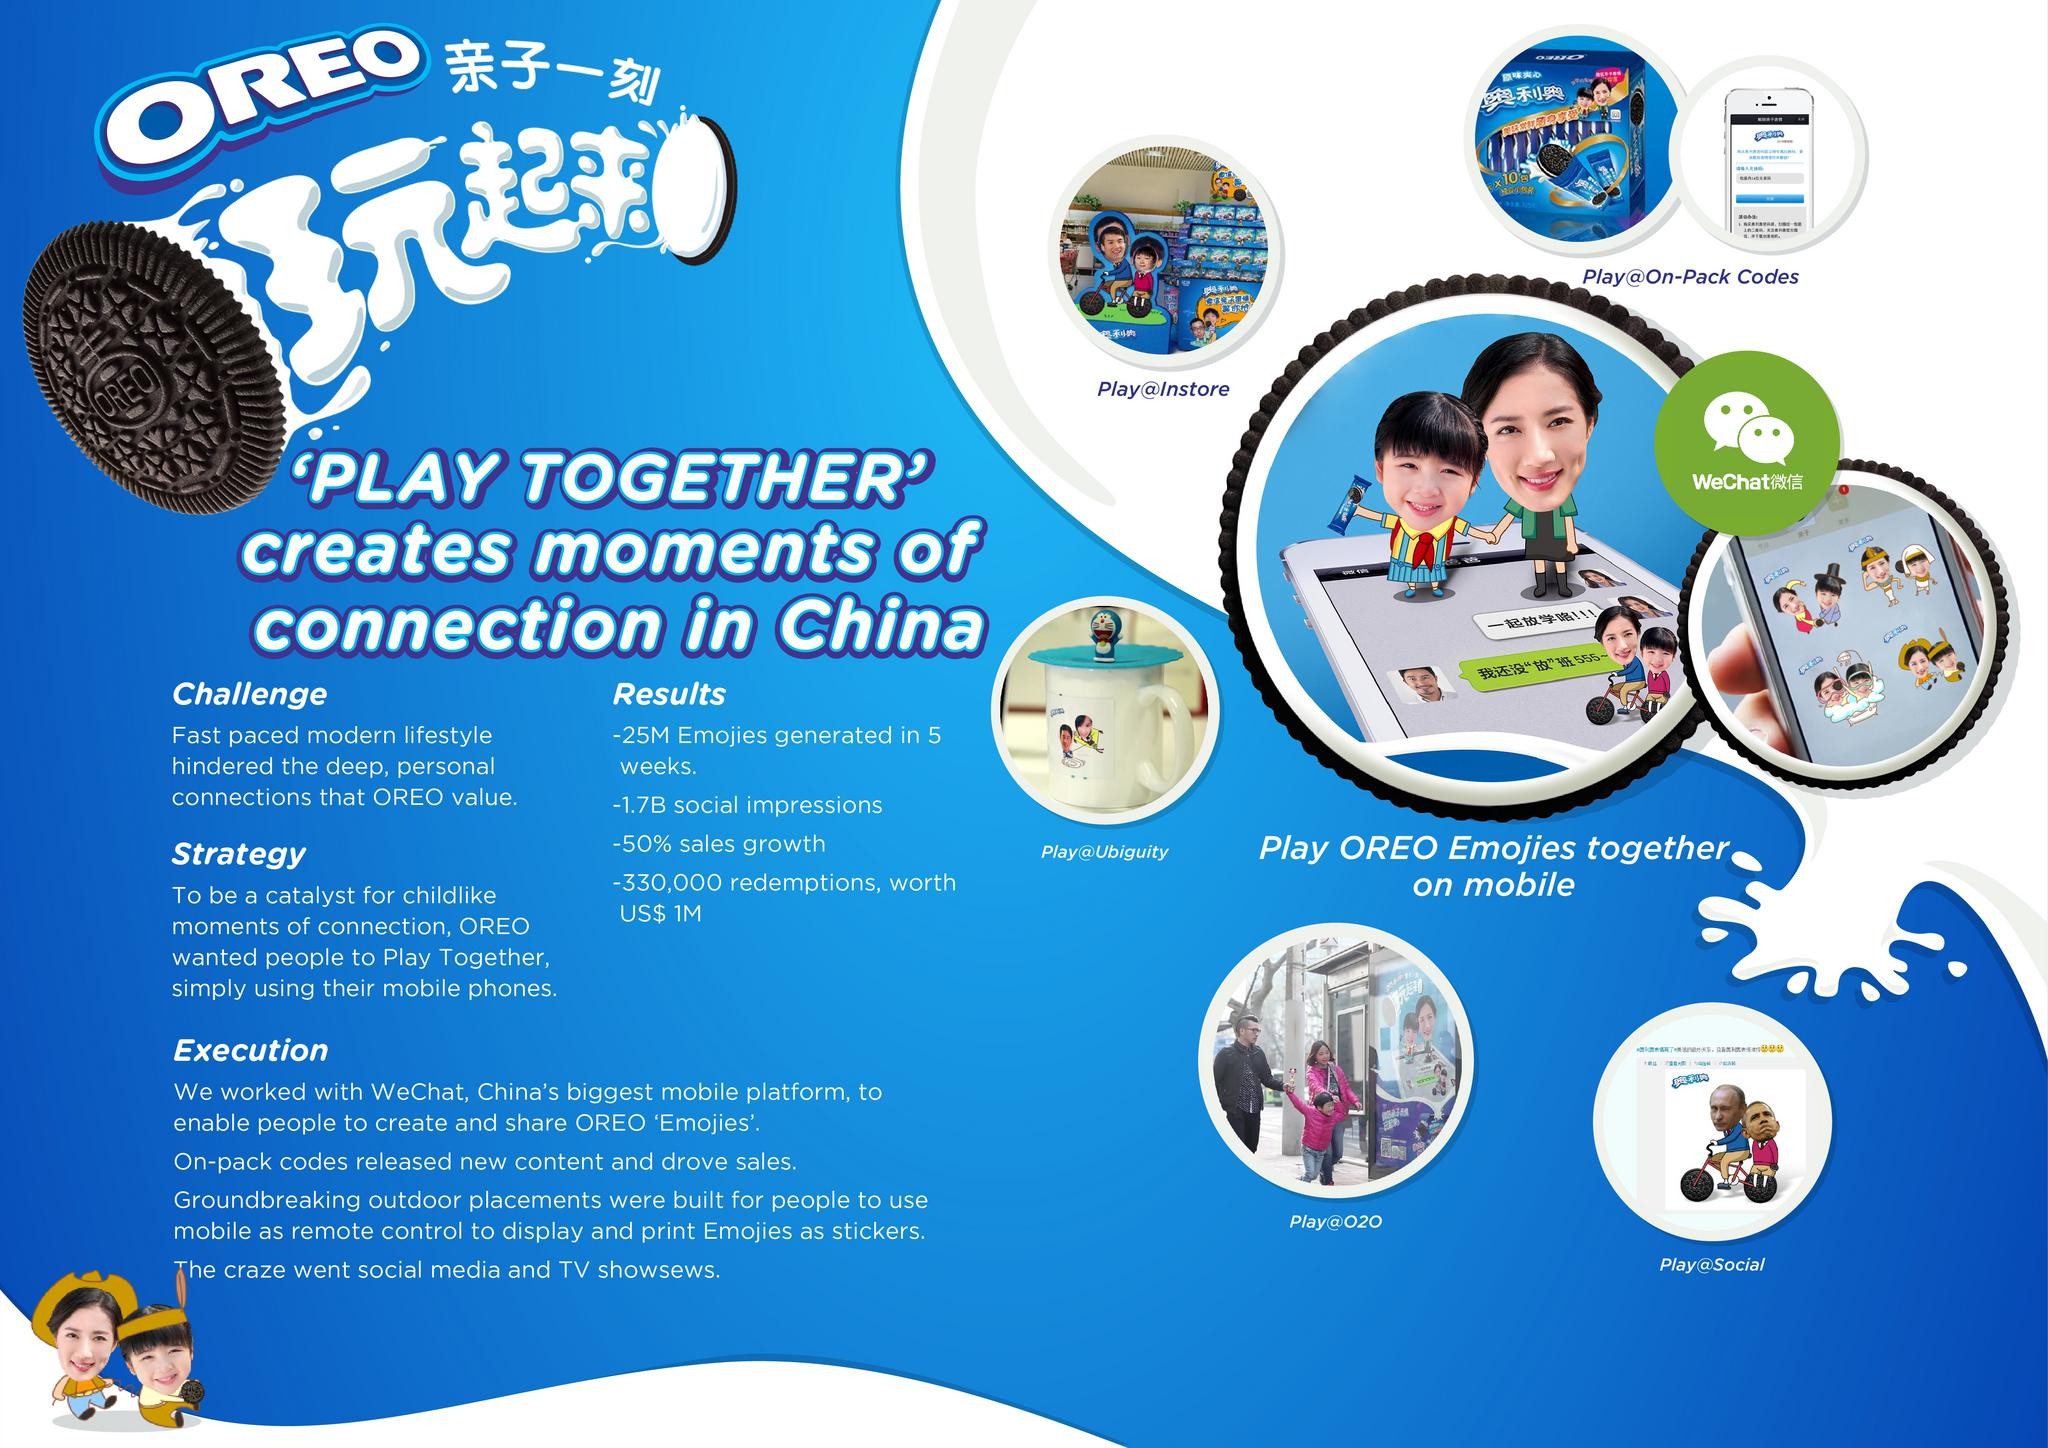 OREO: PLAY TOGETHER!